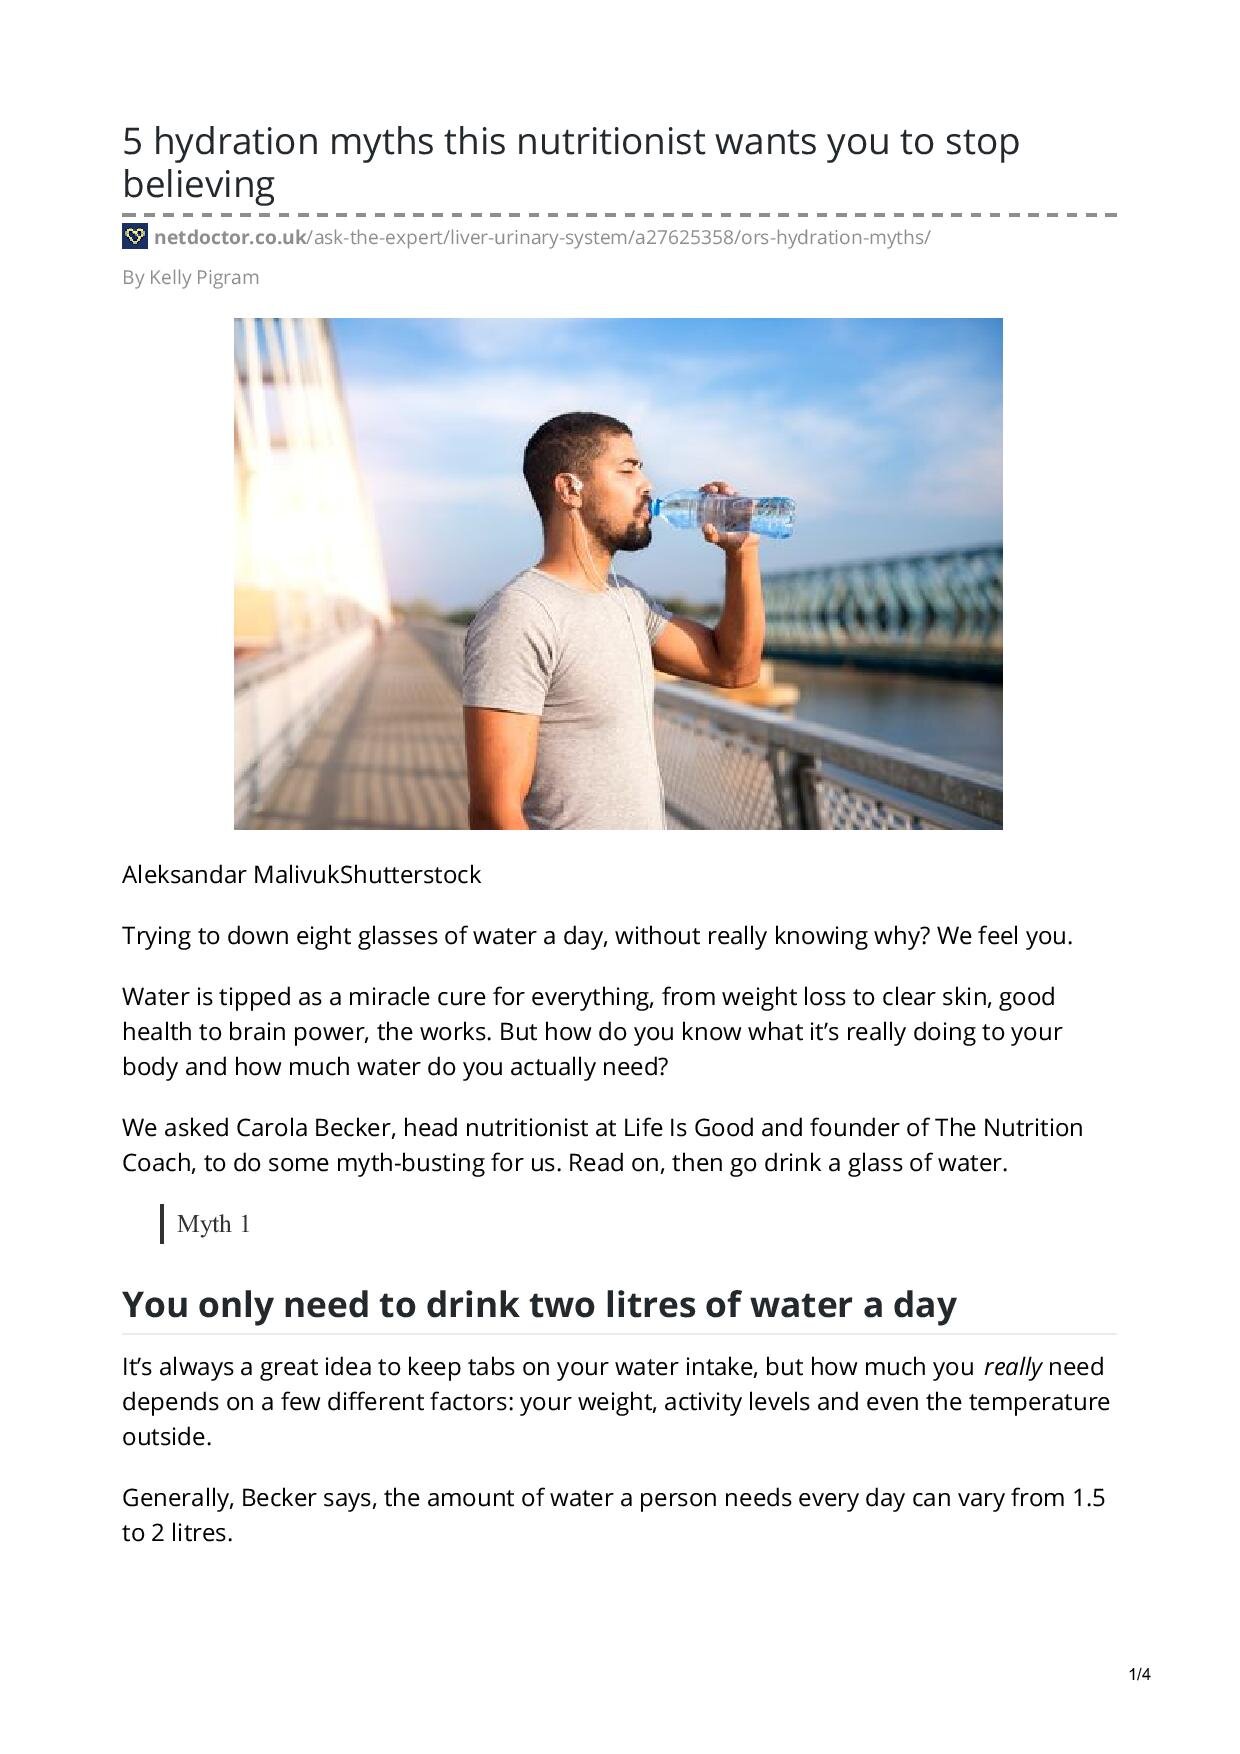 netdoctor.co.uk-5 hydration myths this nutritionist wants you to stop believing-page-001.jpg